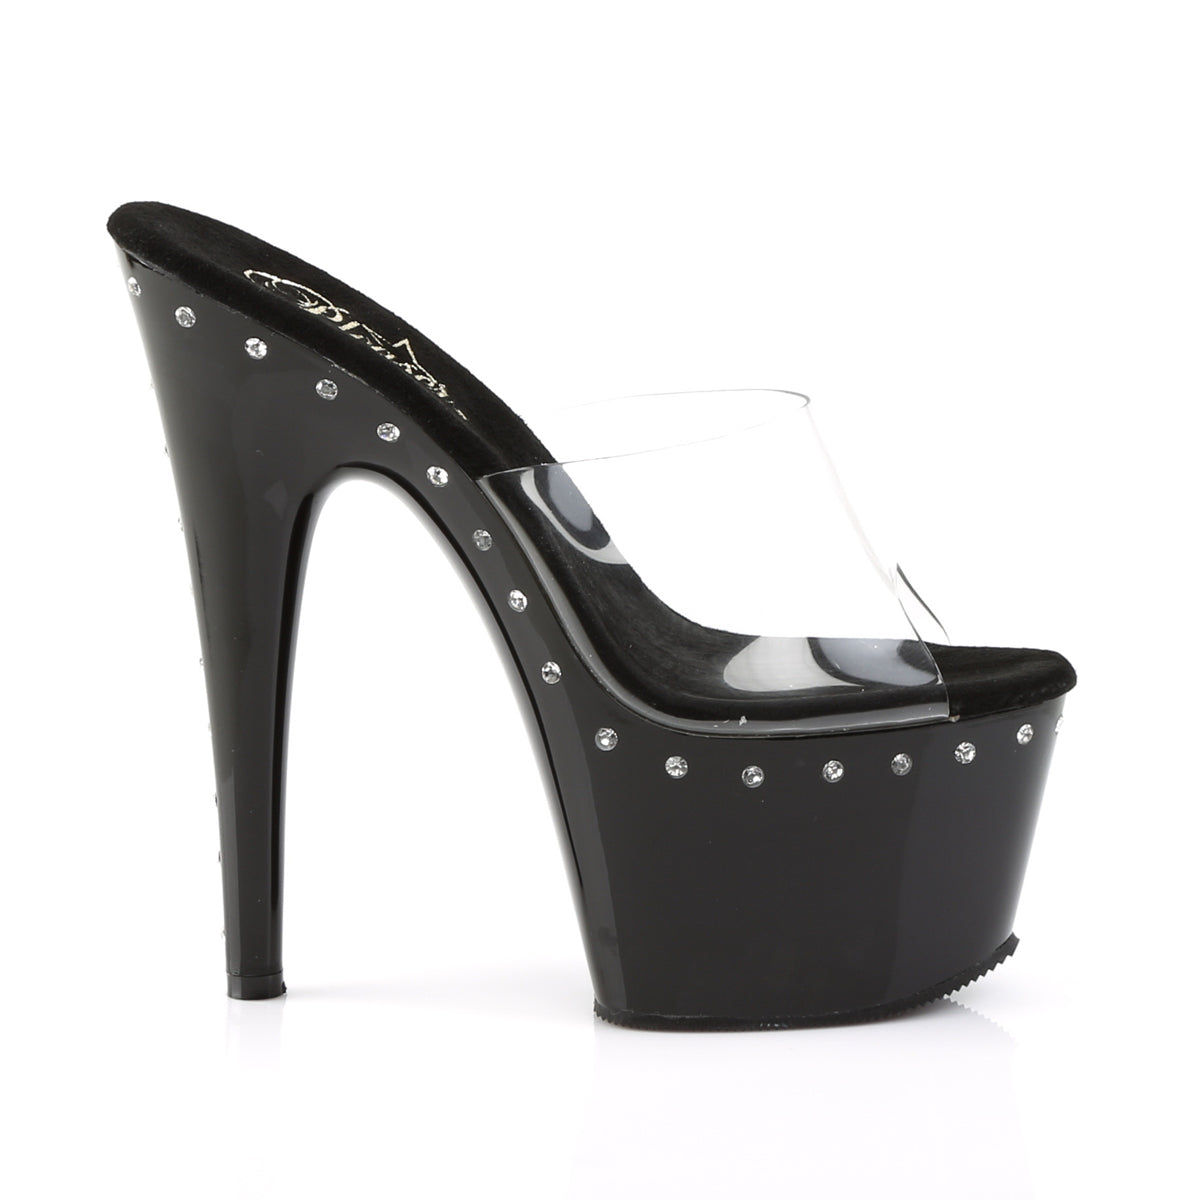 ADORE-701LS 7 Inch Heel Clear and Black Platforms Sexy Shoes-Pleaser- Sexy Shoes Fetish Heels